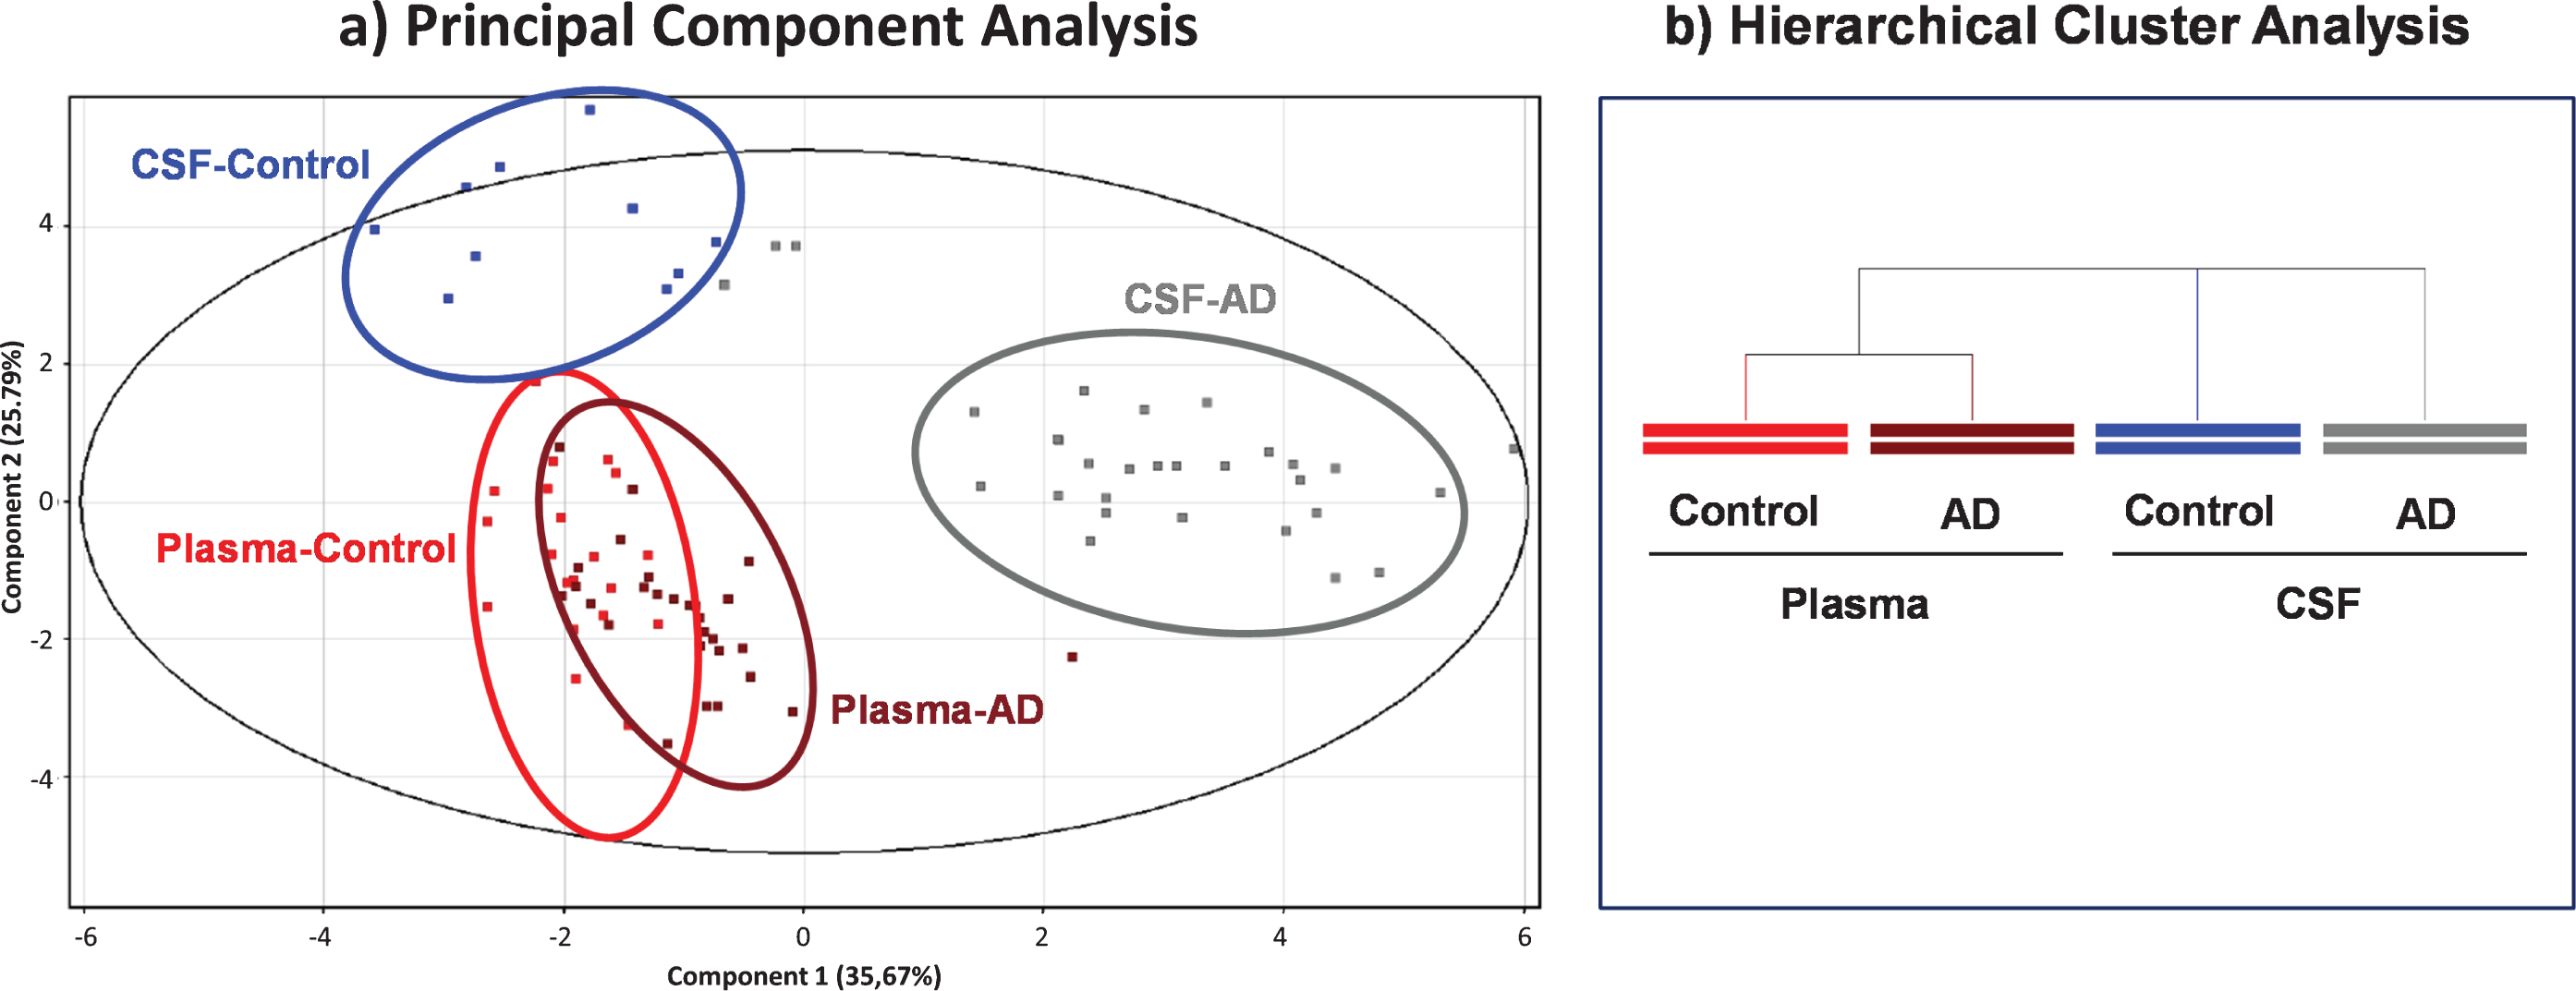 Scores from Principal Component Analysis (PCA) decomposition (a) and hierarchical clustering analysis (b) of mass spectra of albumin post-translational modifications (PTMs) to compare within- and between-group variation datasets.